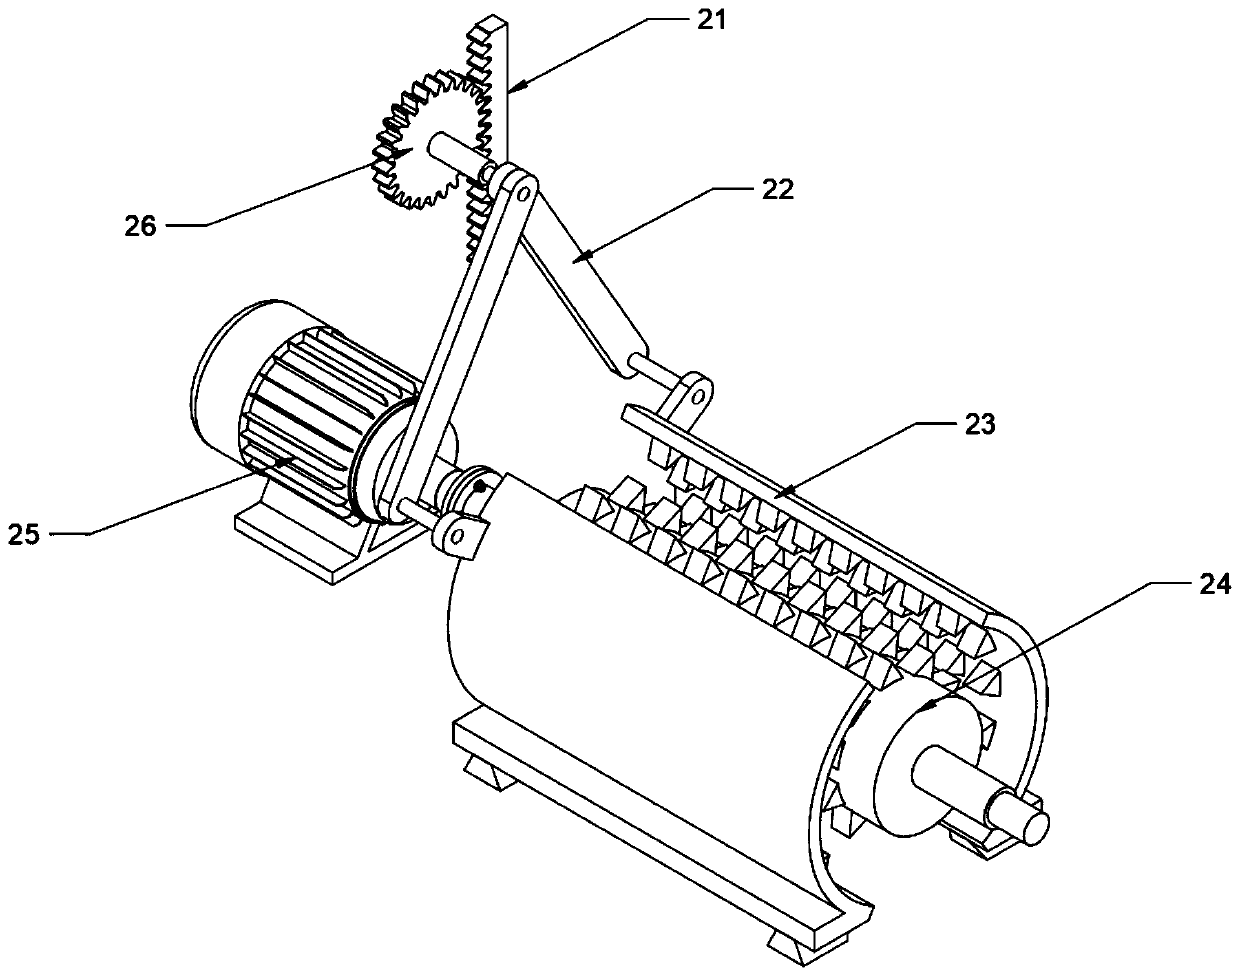 Gravel crushing device for building construction